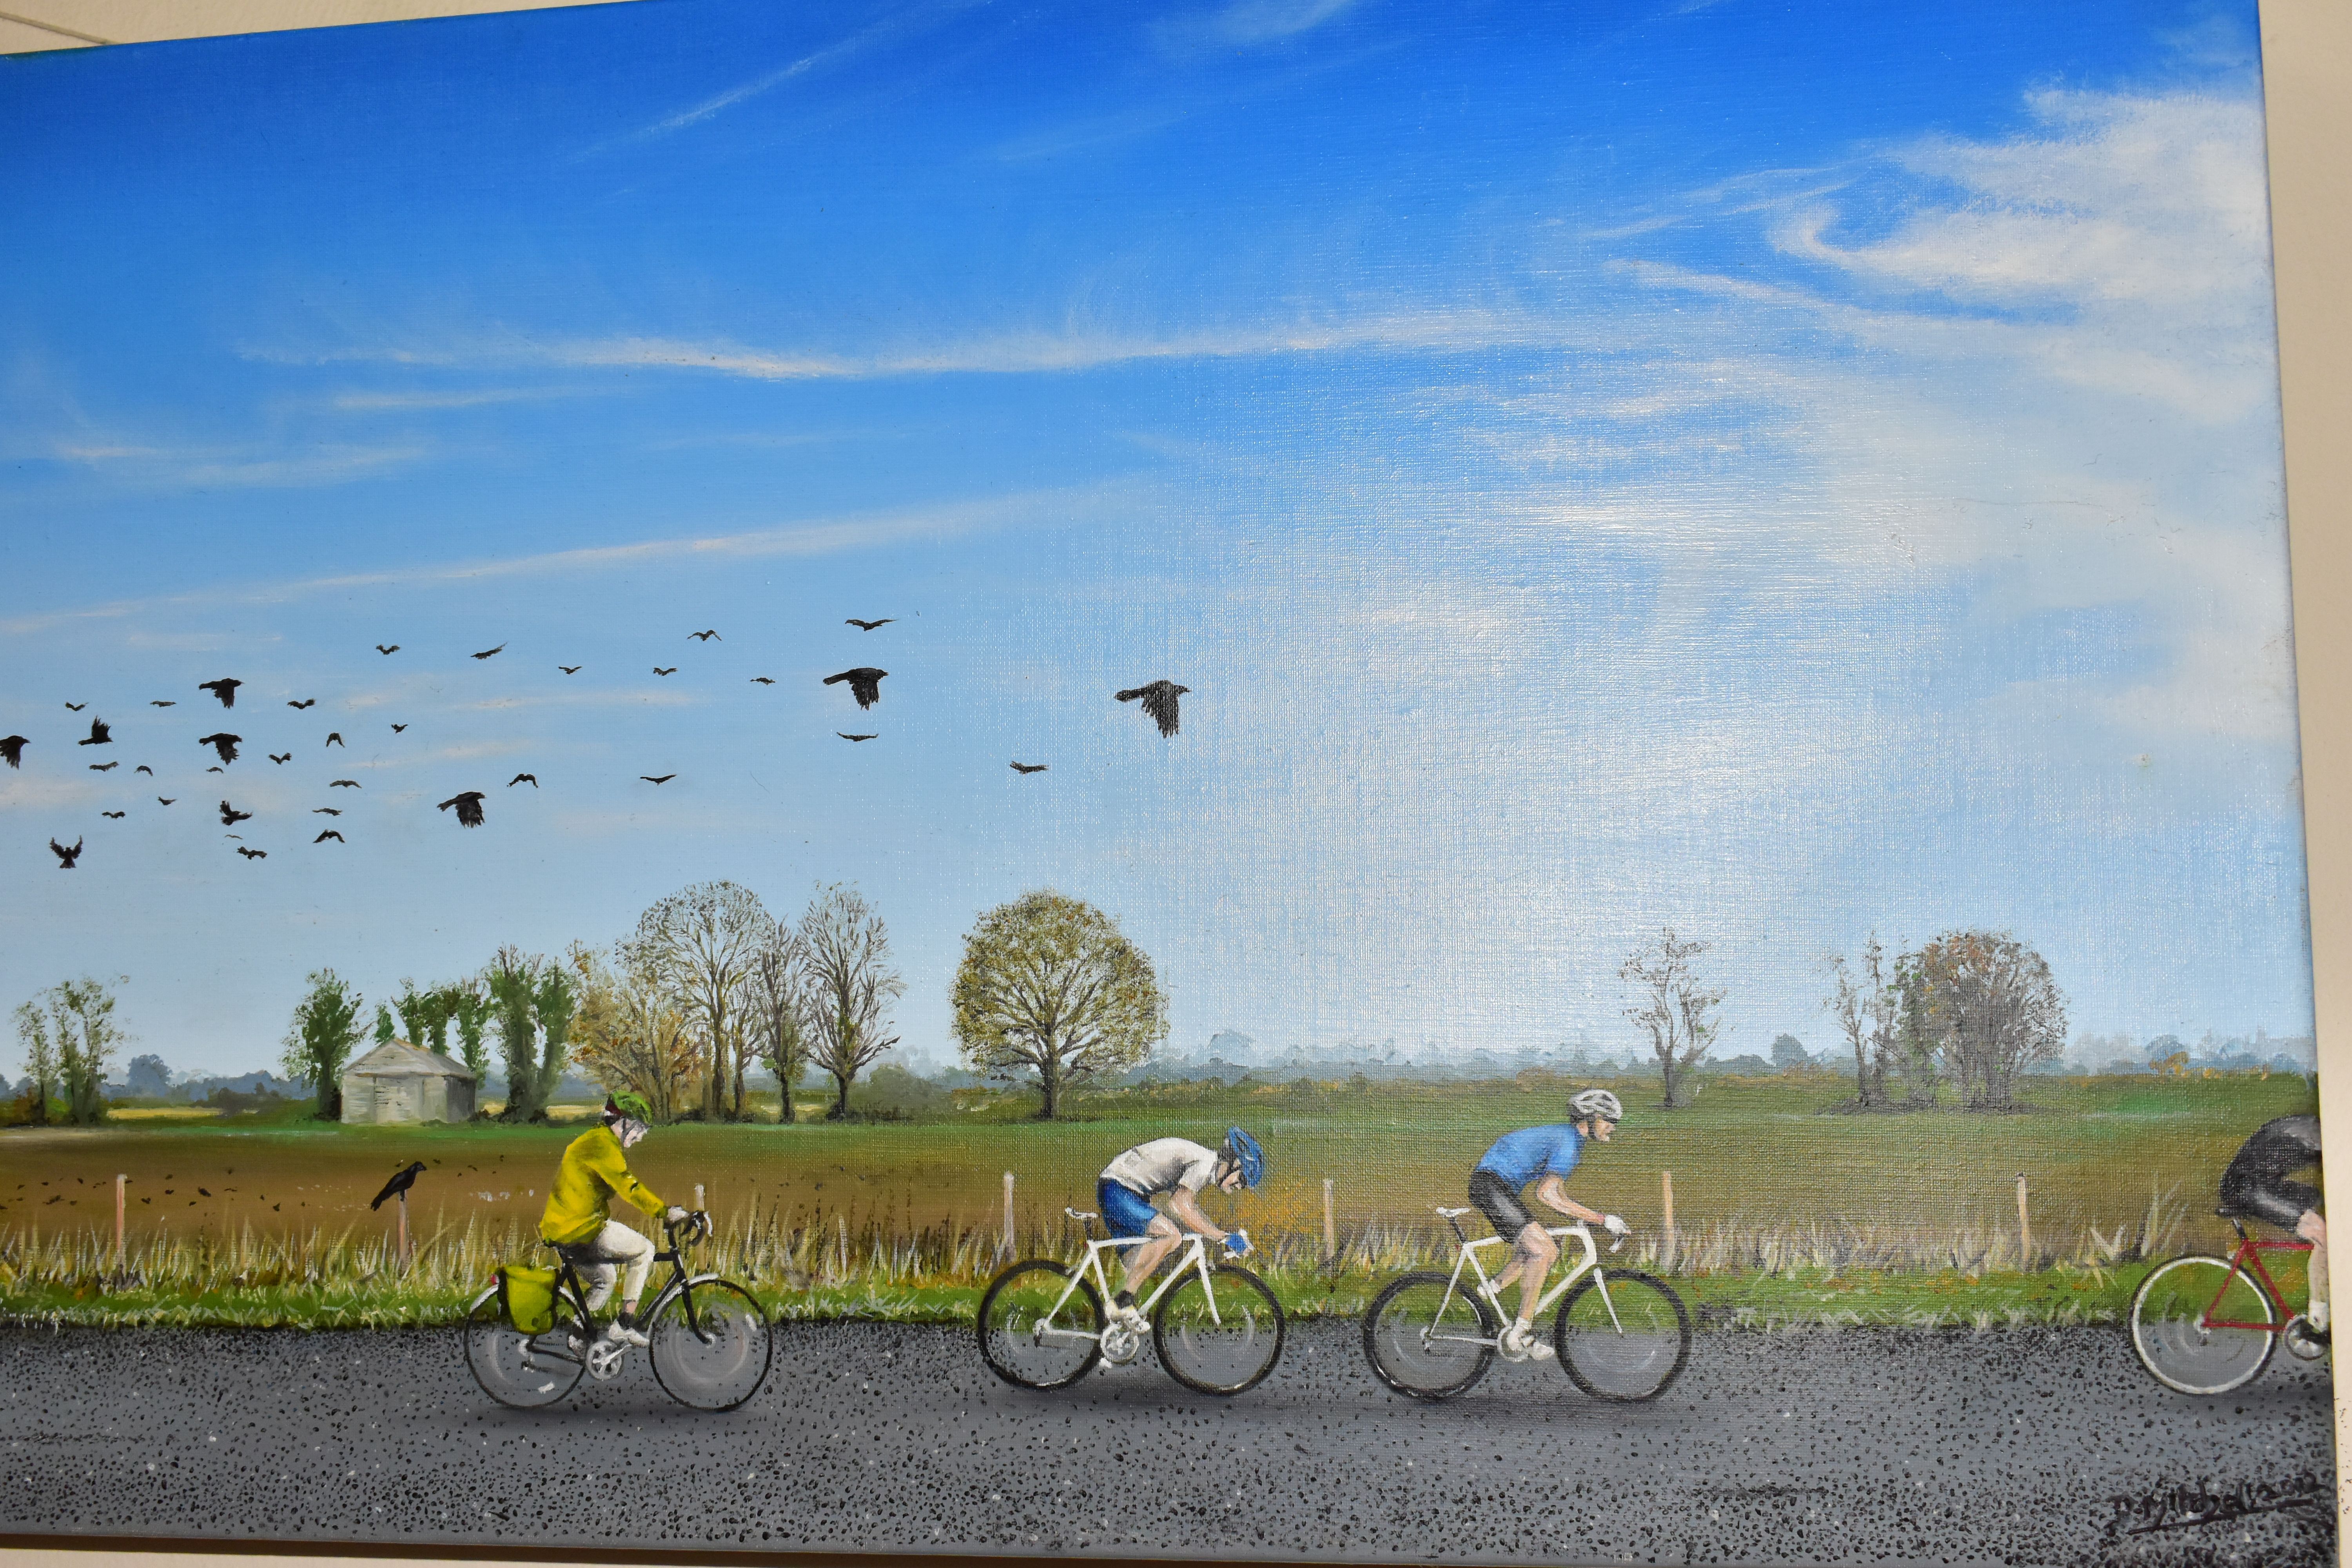 D. MITCHELL (CONTEMPORARY) CYCLISTS RIDING ALONG A RURAL ROAD, signed and dated bottom right 2002, - Image 2 of 4